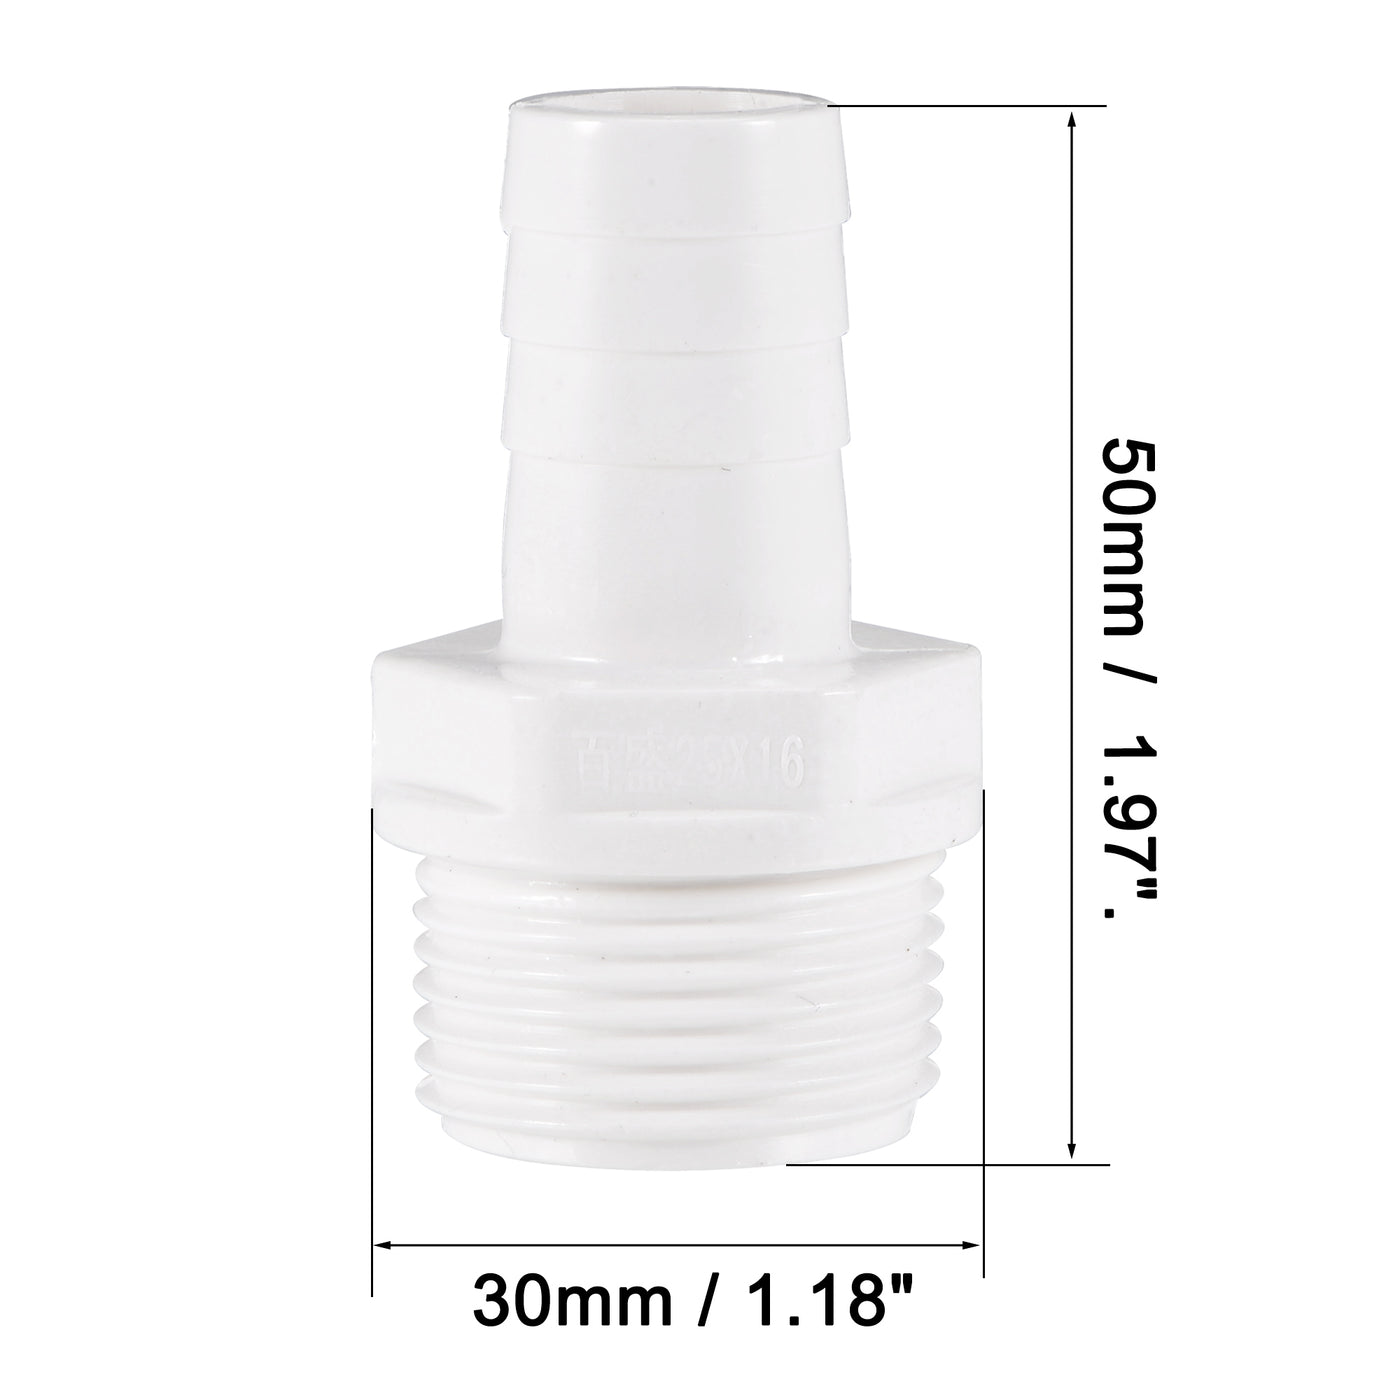 uxcell Uxcell PVC Tube Fitting Adapter 16mm Barbed x G3/4 Male White for Aquariums, Water Tanks, Tubs, Pools 6Pcs